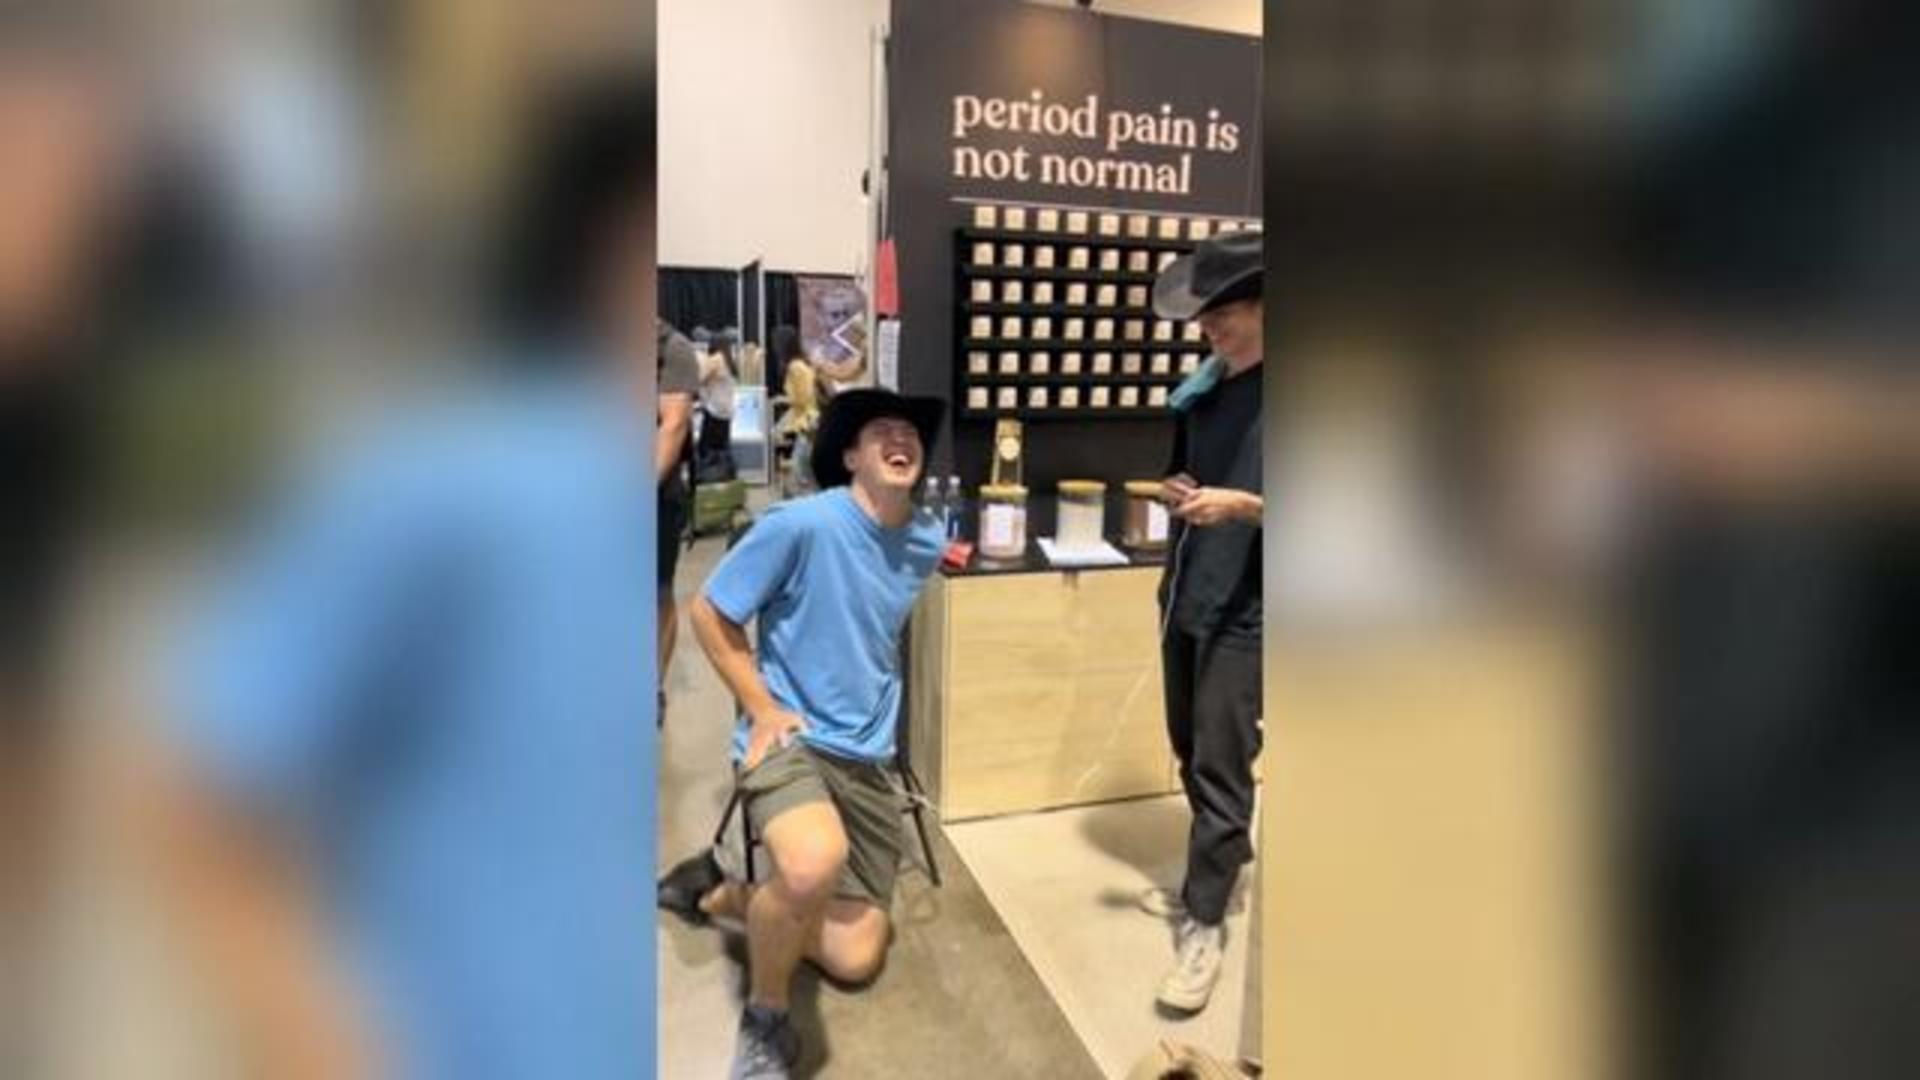 Video Of Men Trying Period Pain Simulator Goes Viral - Motherly